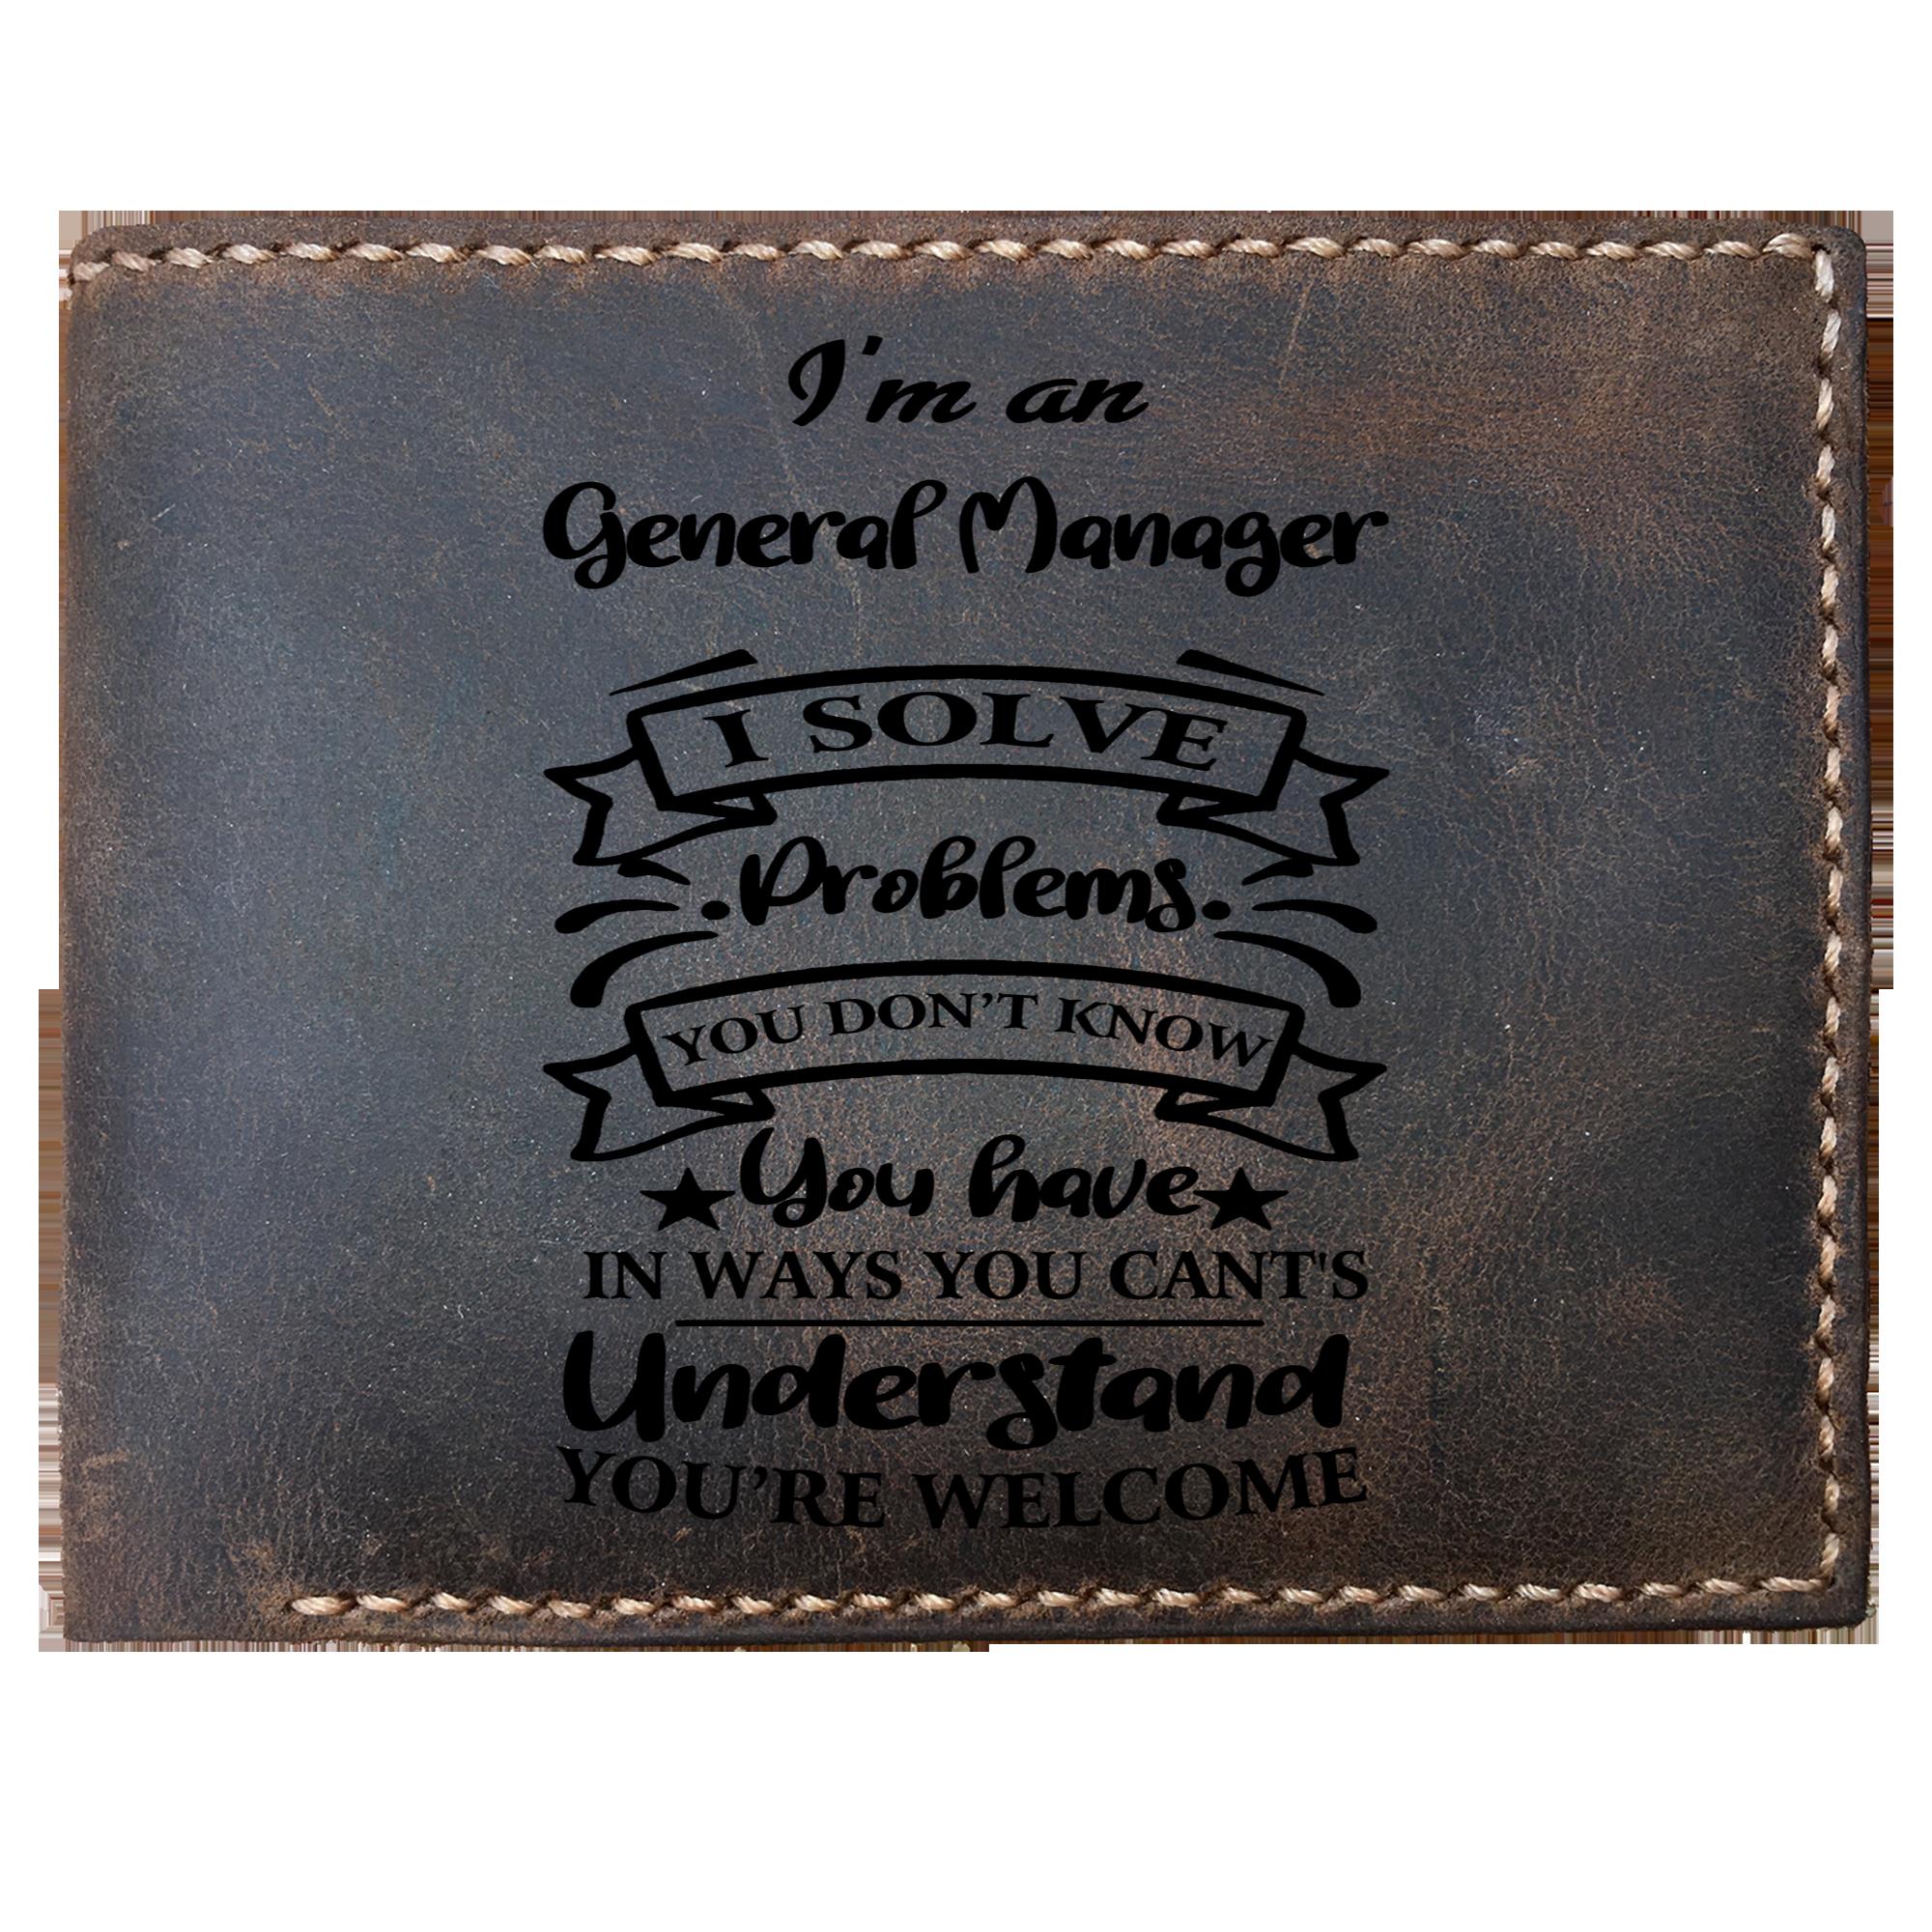 Skitongifts Funny Custom Laser Engraved Bifold Leather Wallet For Men, I'm an General Manager Solve Problems, Father's Day Gifts